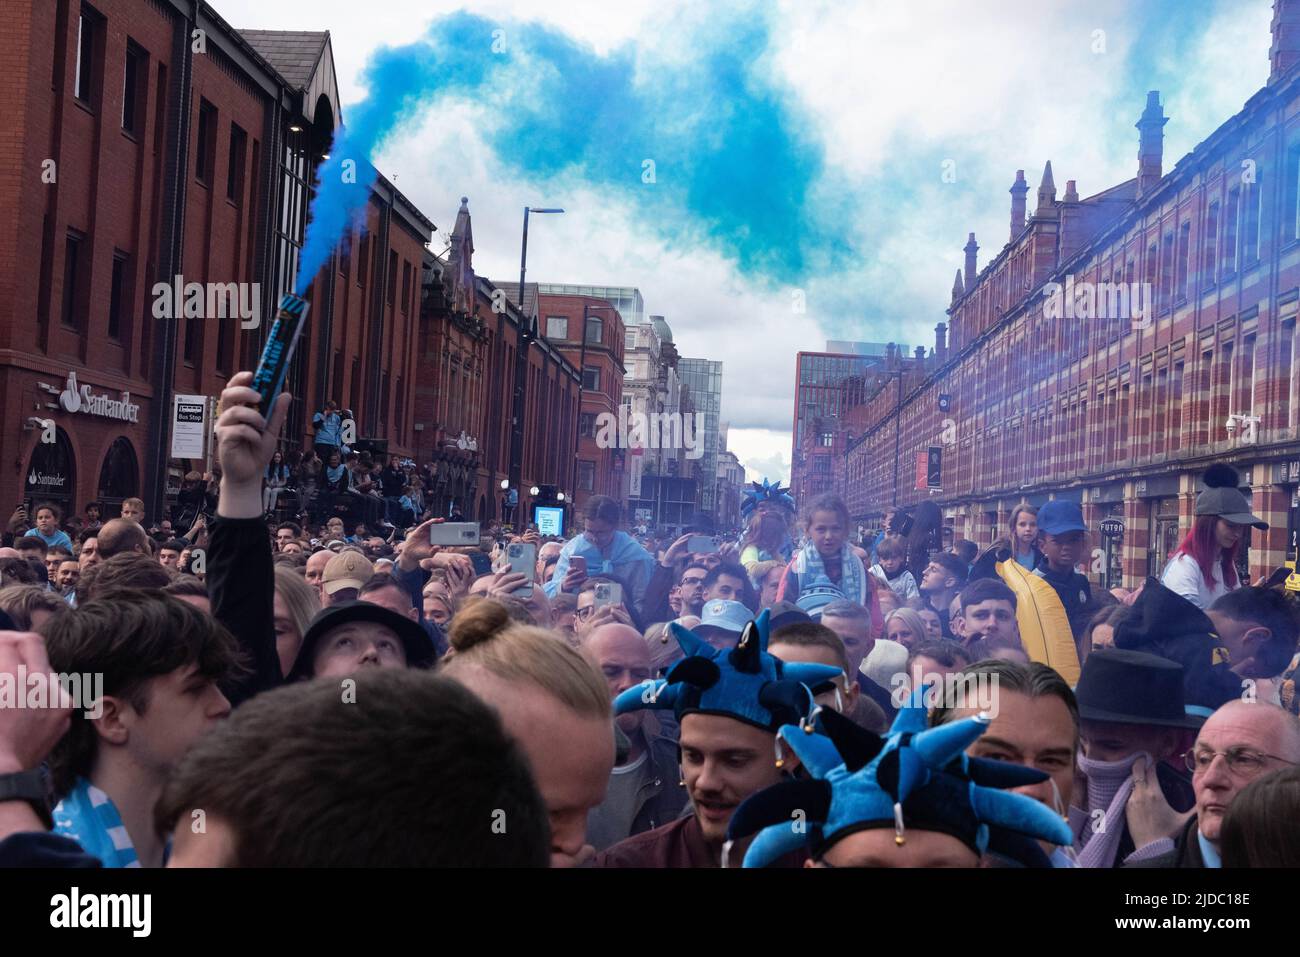 Crowds of fans celebrate Manchester City winning 4 Premier League titles in 5 years with an open top bus parade through the streets of Manchester Stock Photo